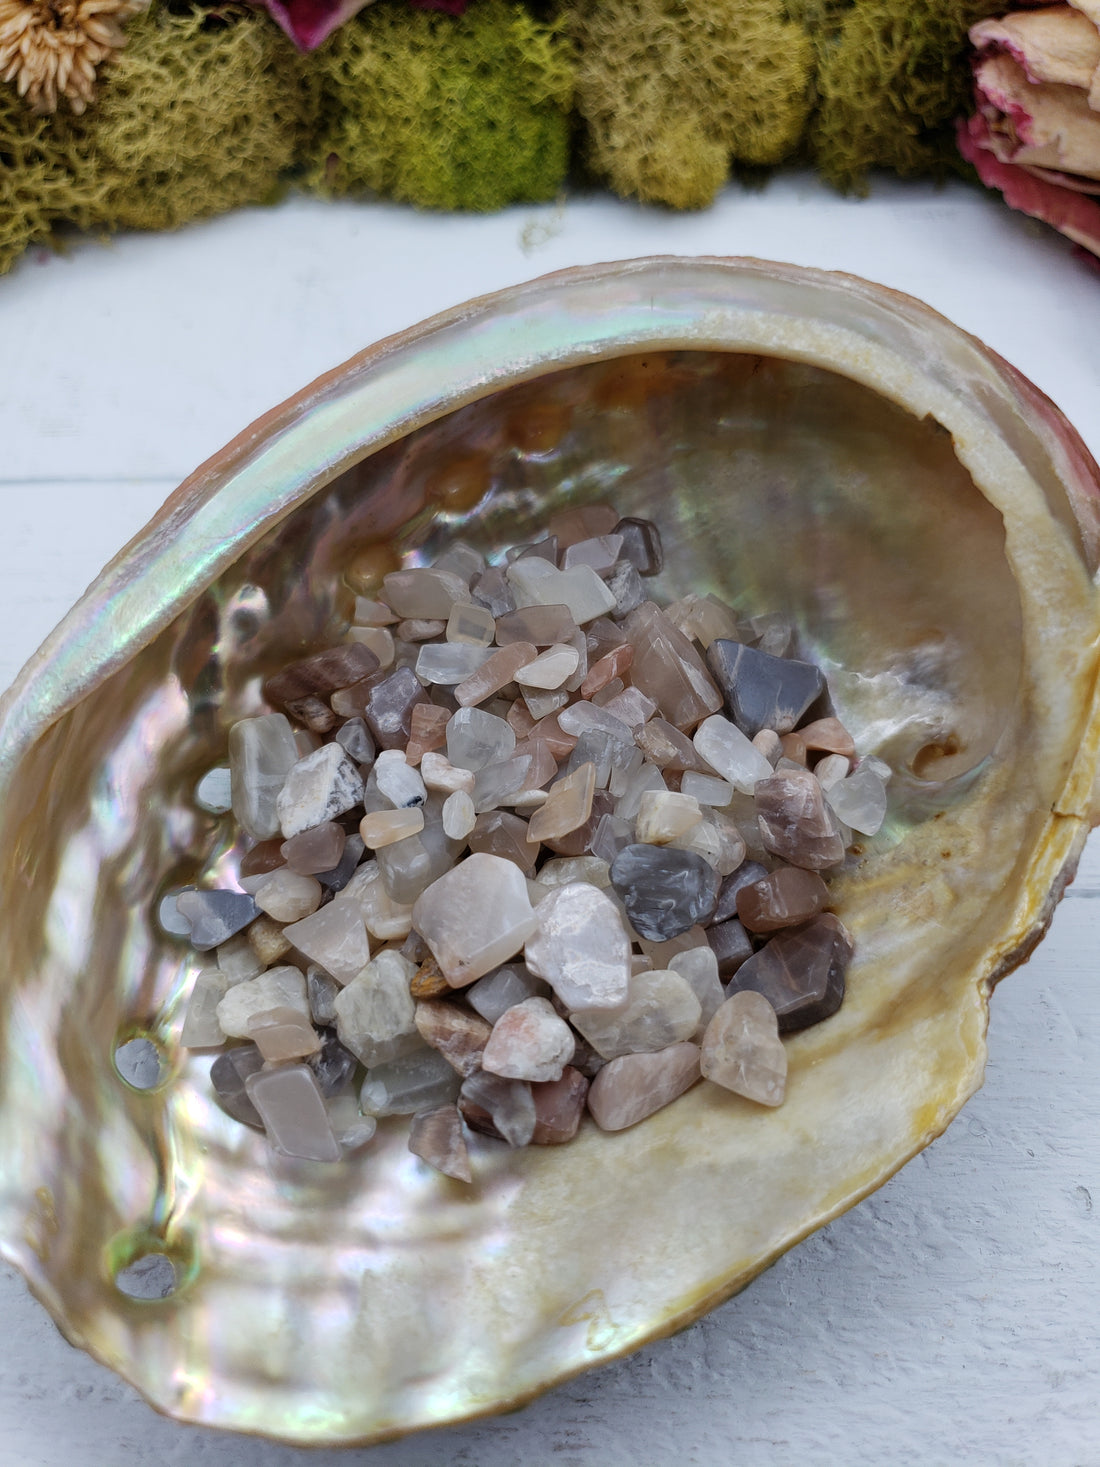 One ounce of moonstone crystal chips in abalone shell